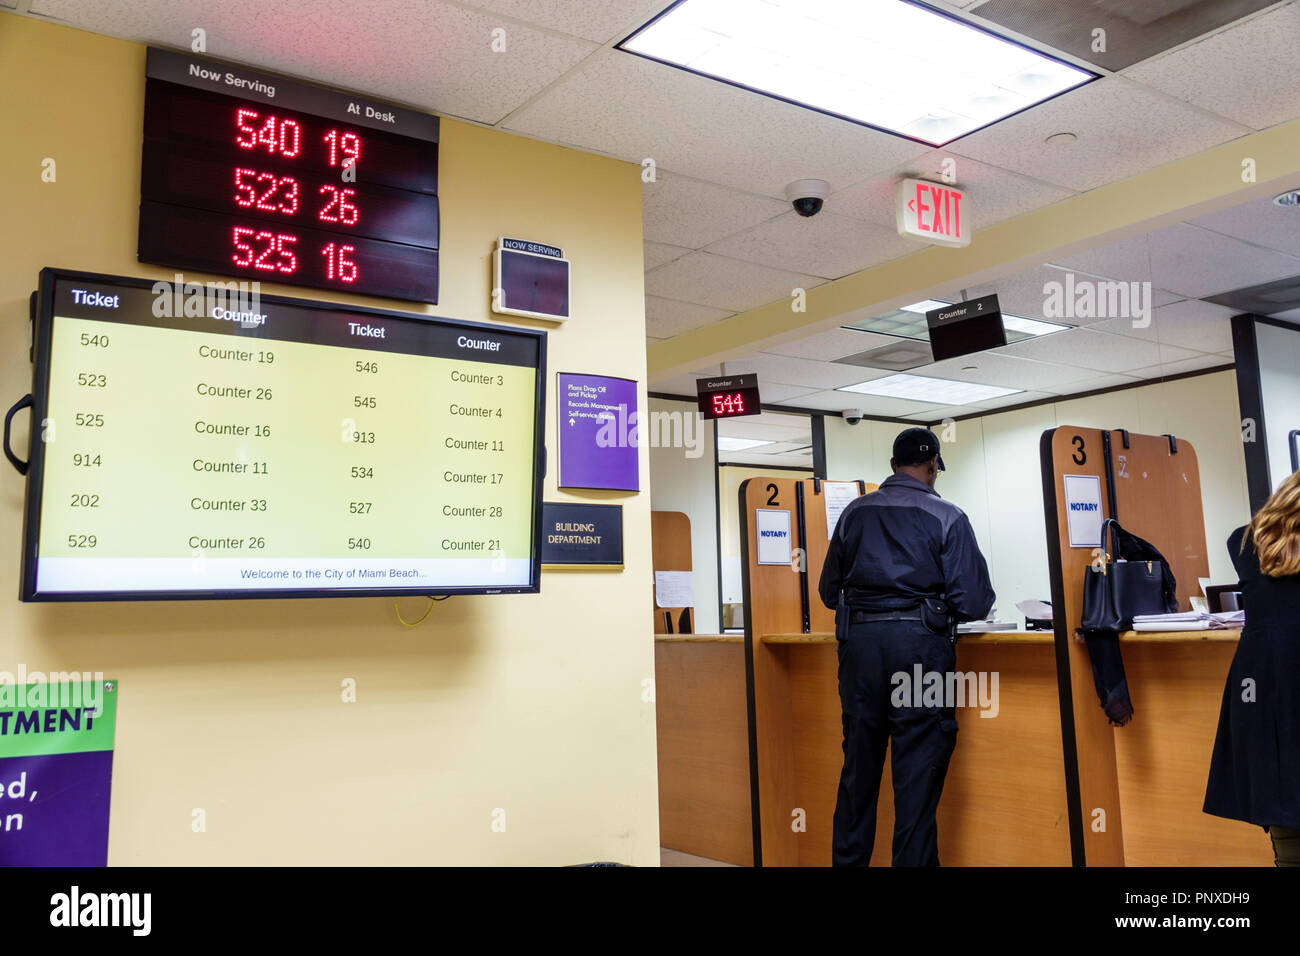 Miami Beach Florida,City Hall,building permit department,now serving,waiting turn,counter,FL180201007 Stock Photo